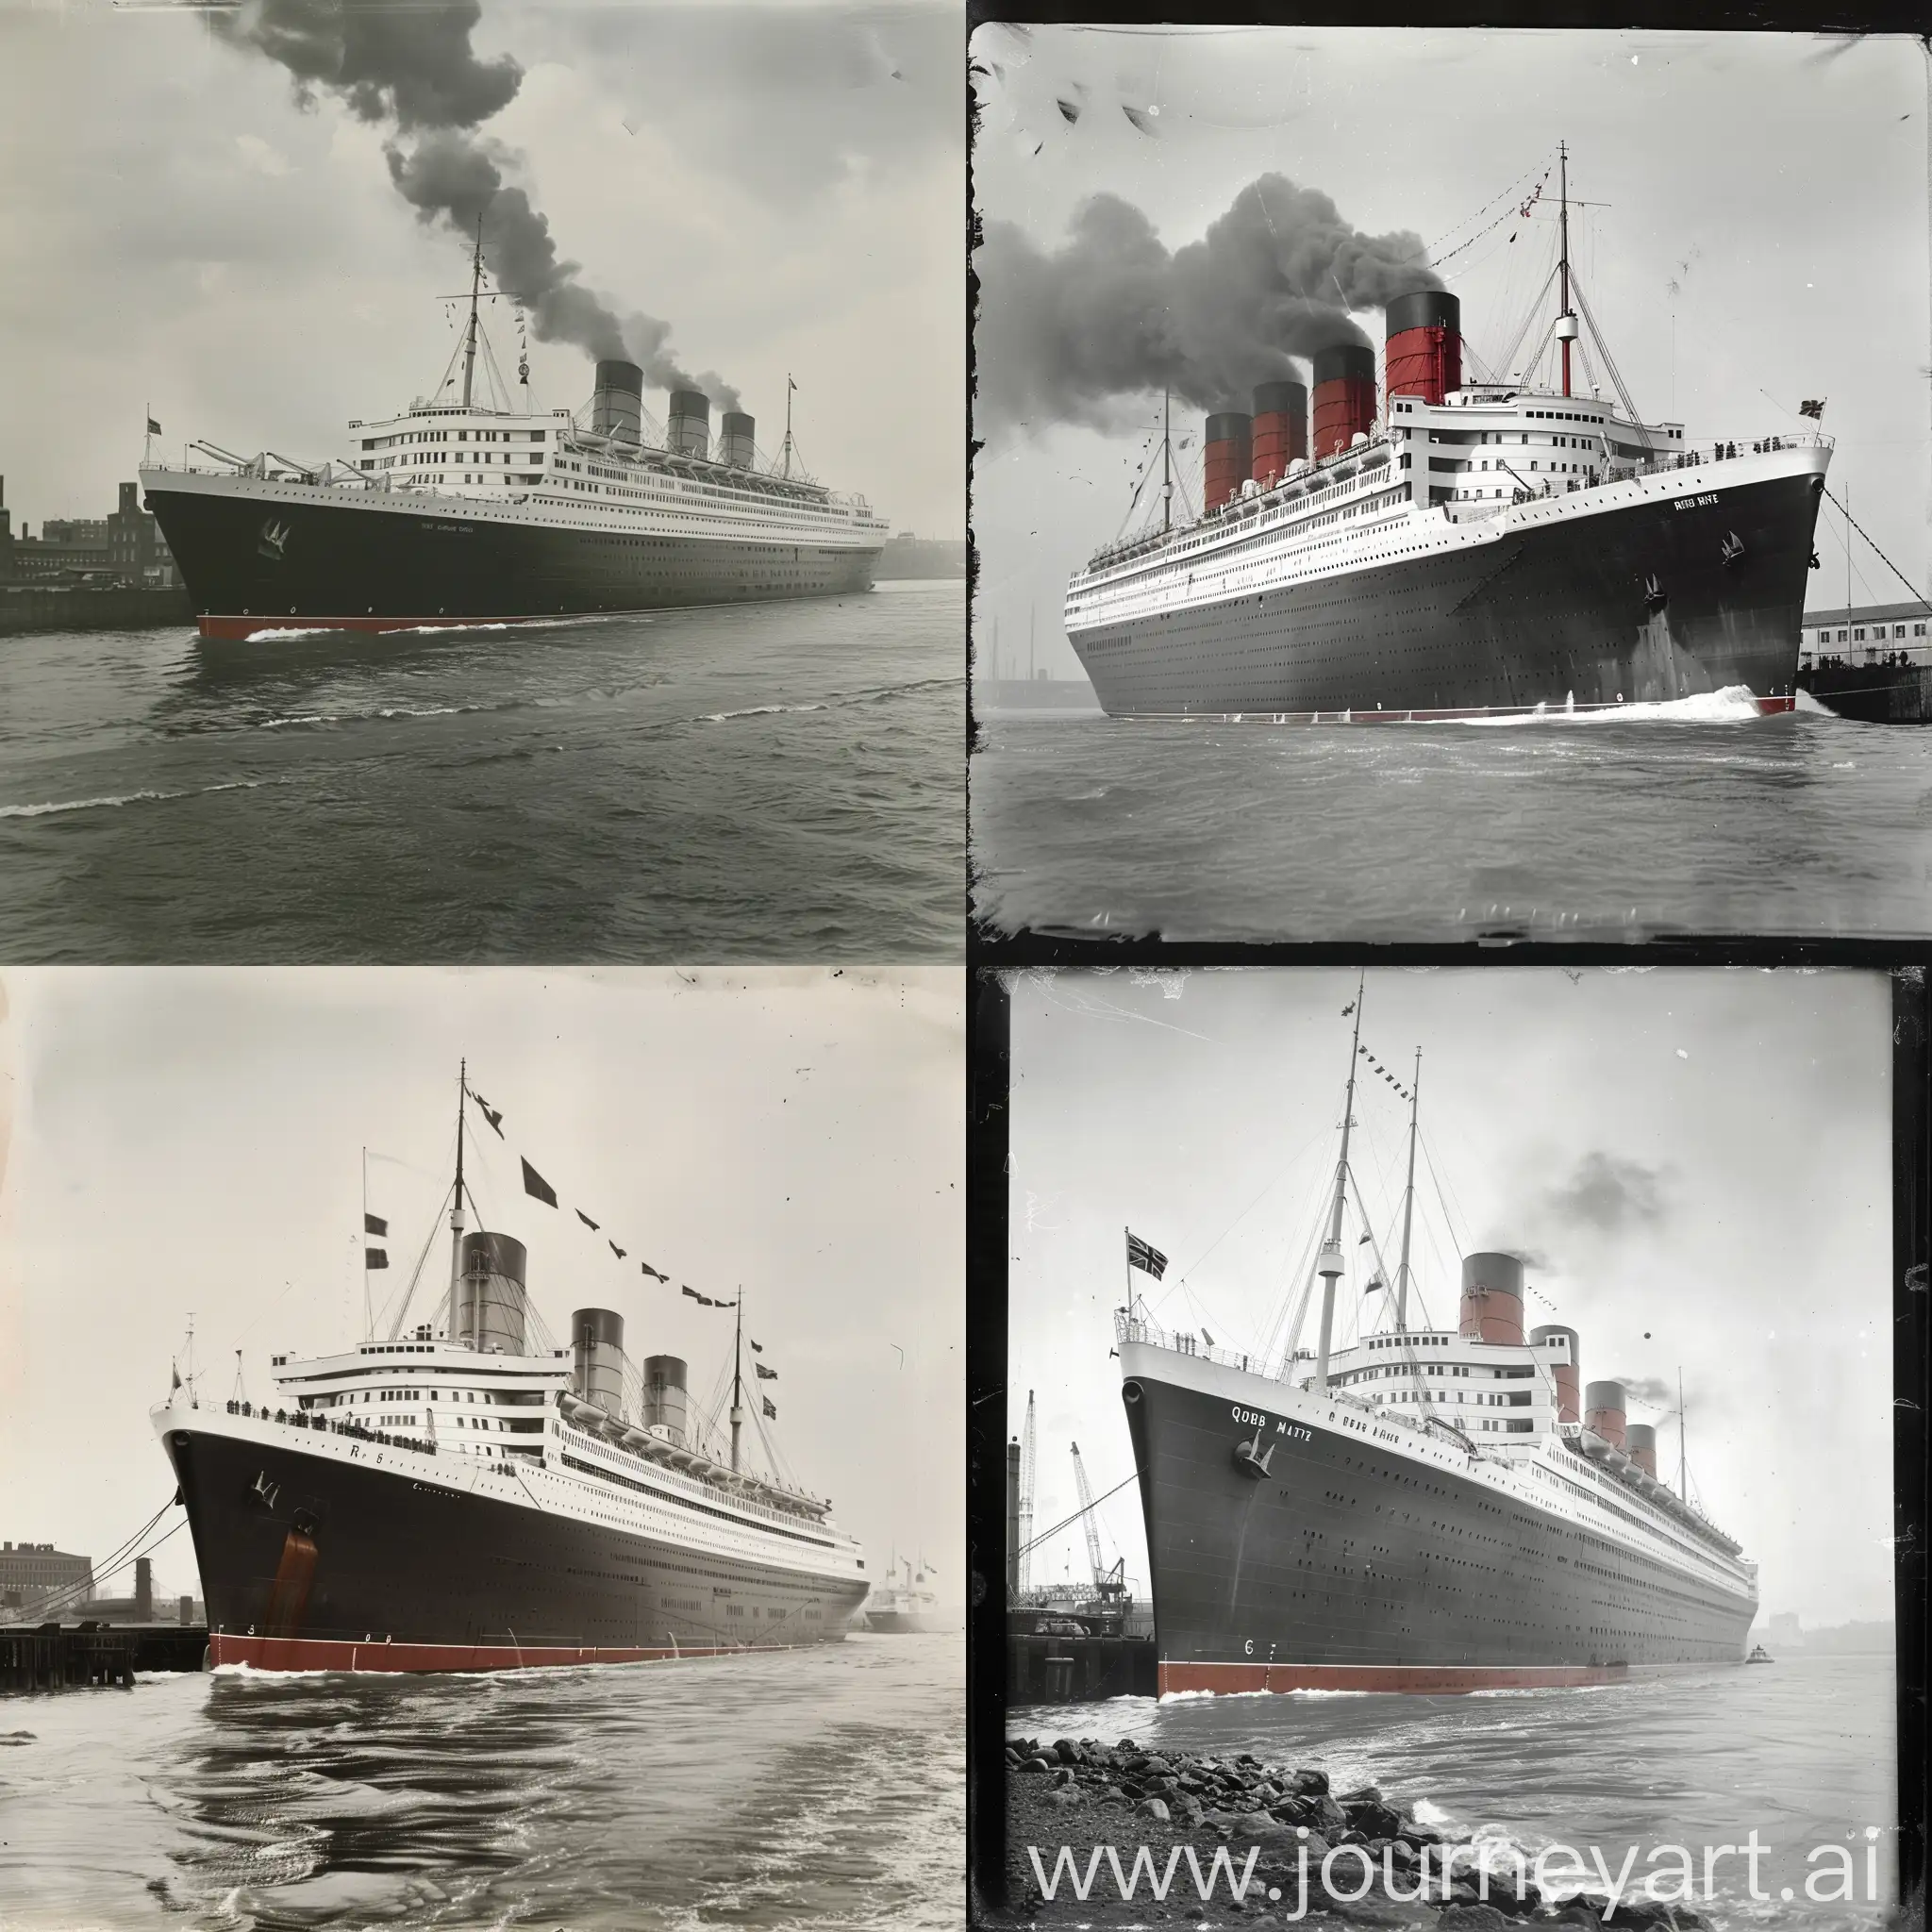 The British liner RMS Queen Mary, leaving a ship port, black and , old photograph, side view, profile pic of the ship.